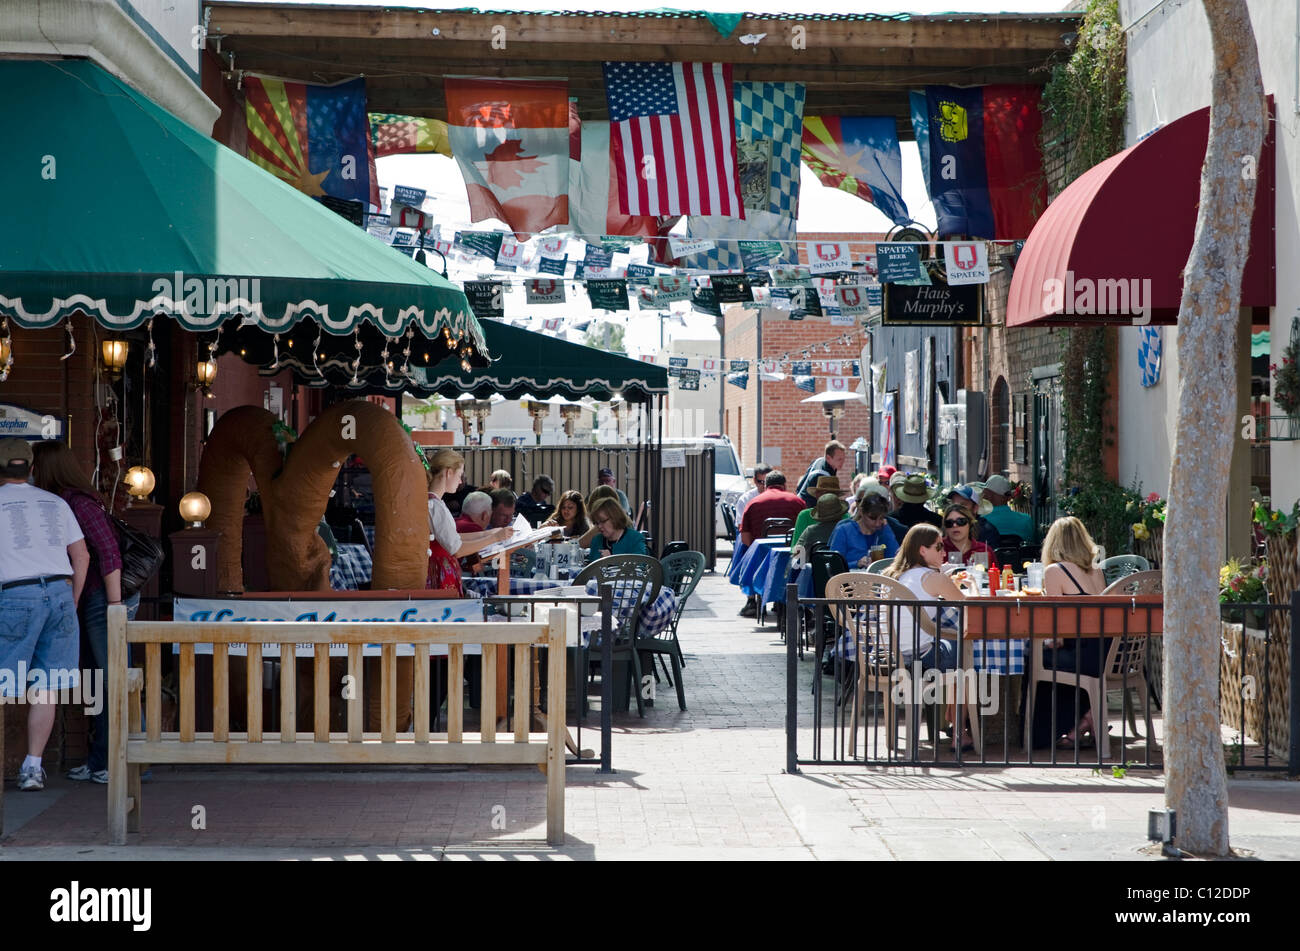 Al Fresco dining at Haus Murphy's in Historic Old Town Glendale, Arizona, USA Stock Photo